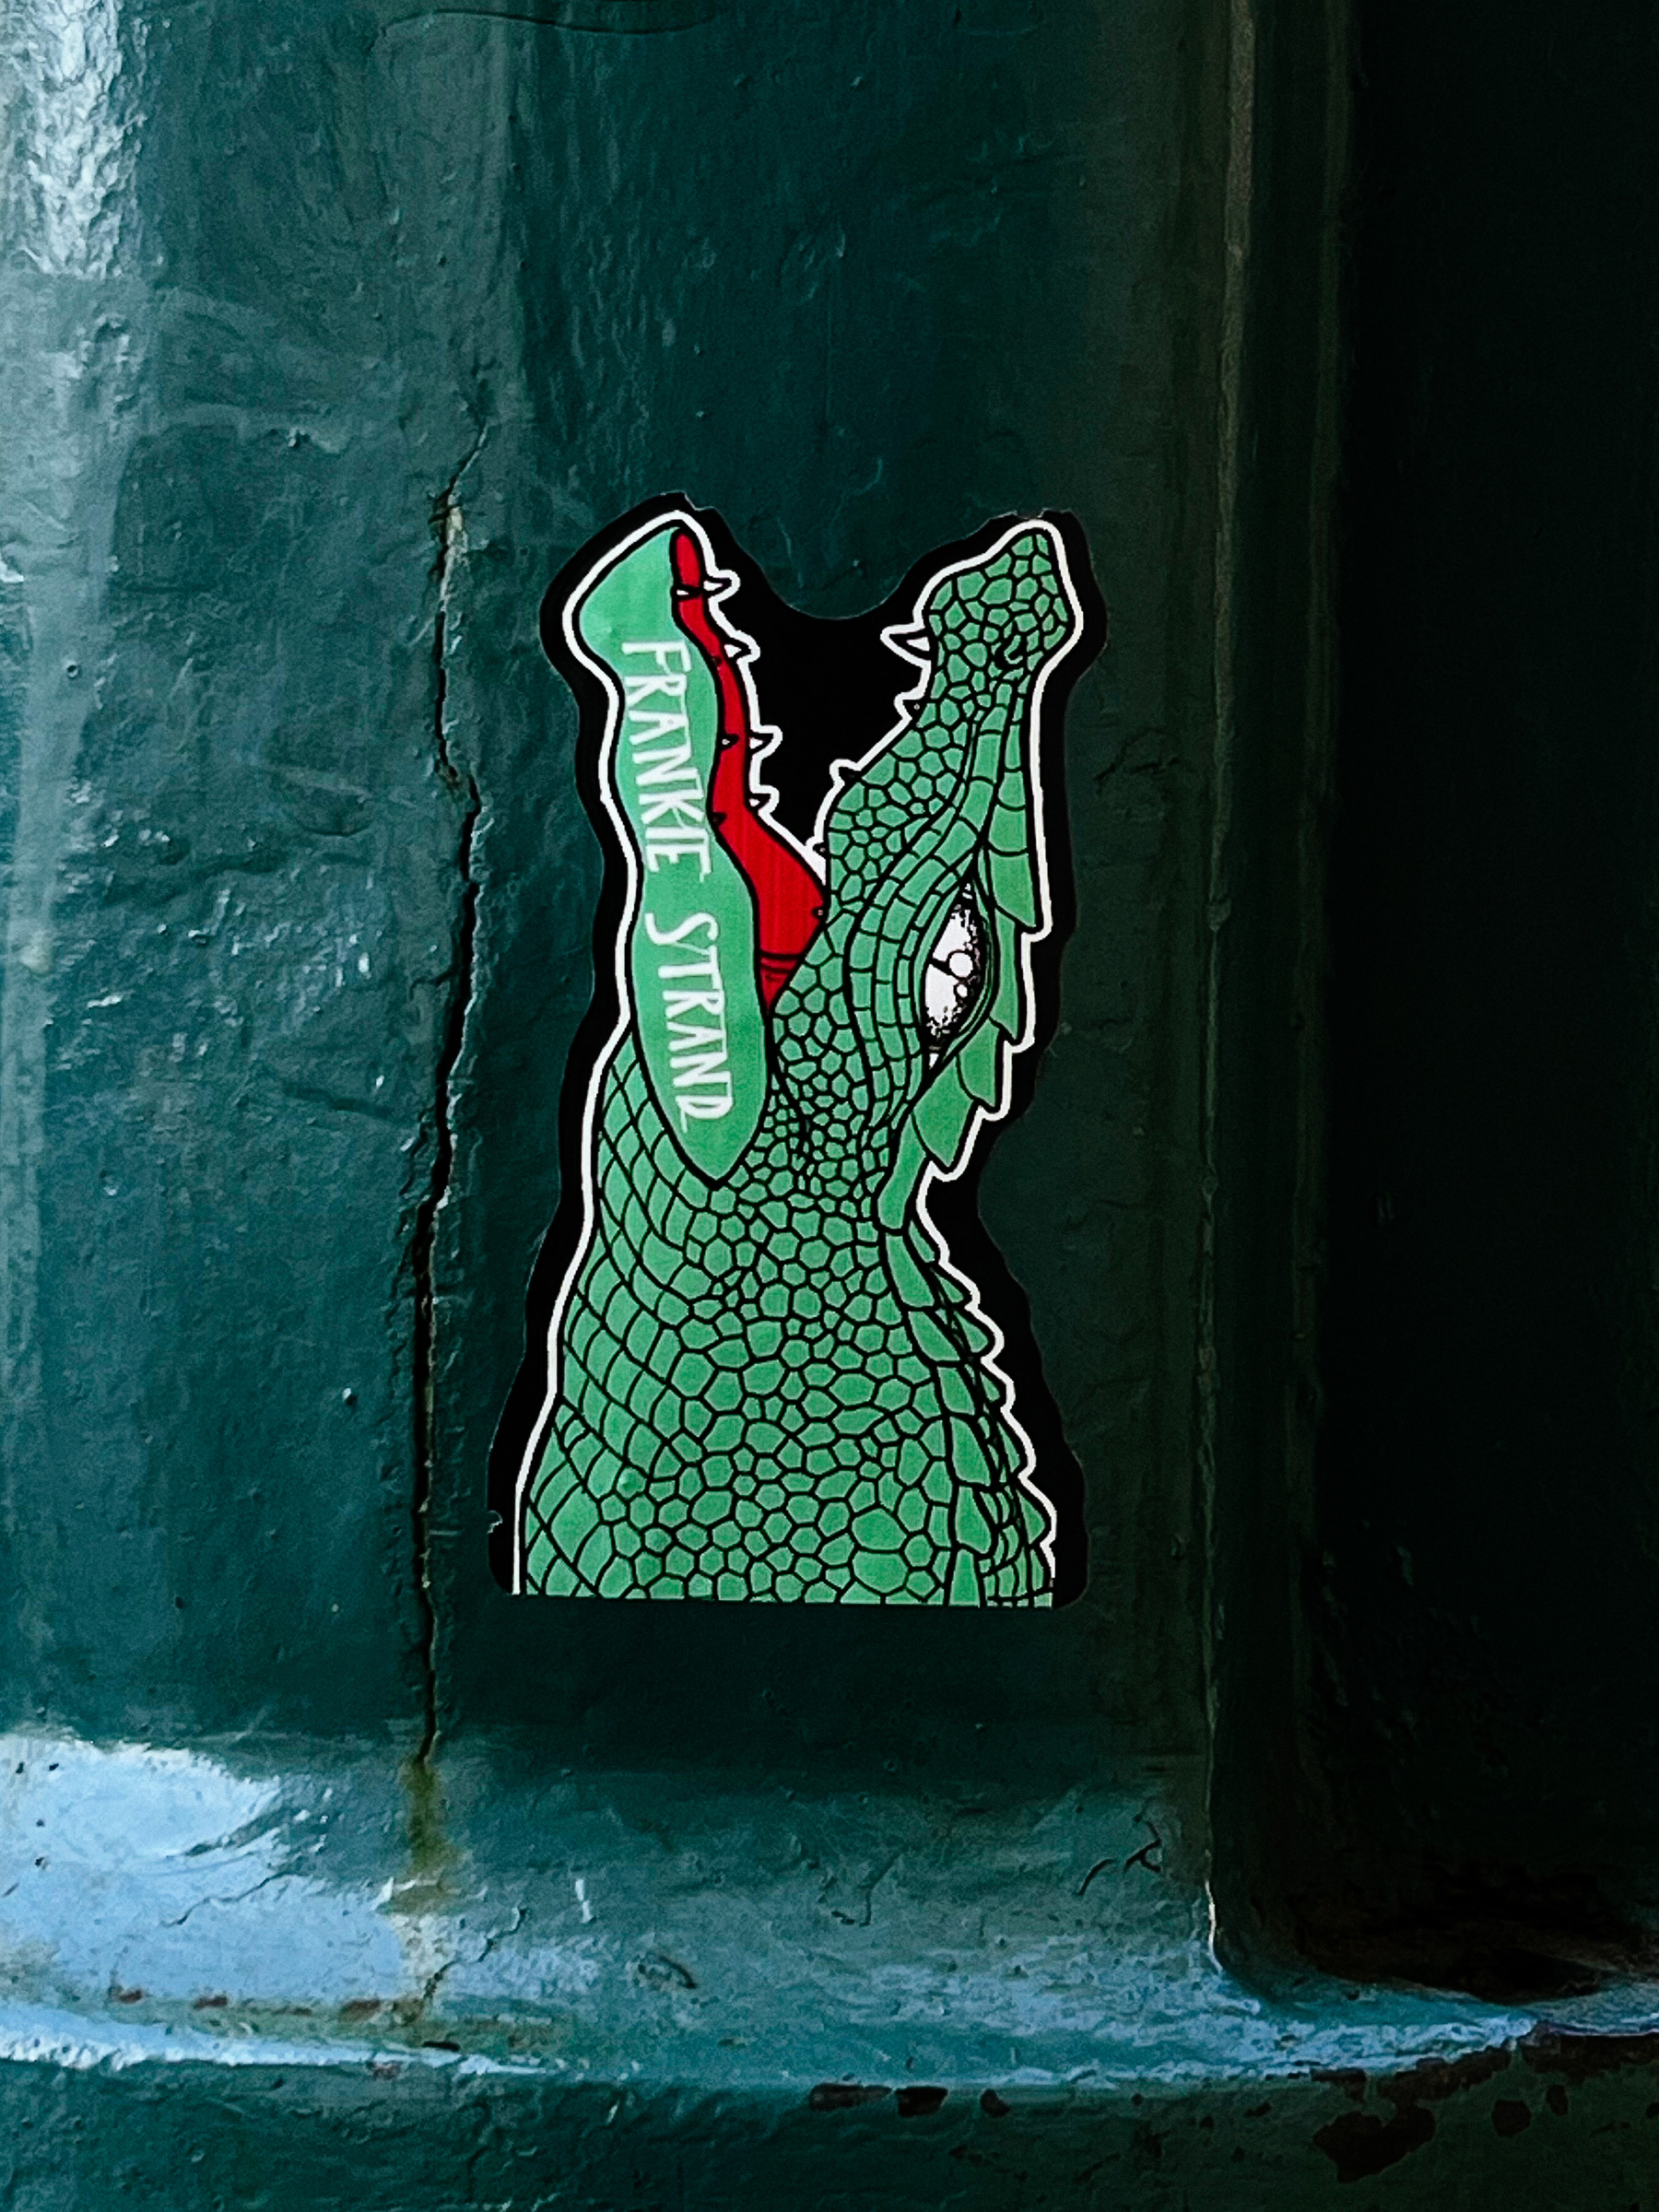 Sticker with a crocodile’s head, mouth open. The name “Frankie Strand” written on it.  